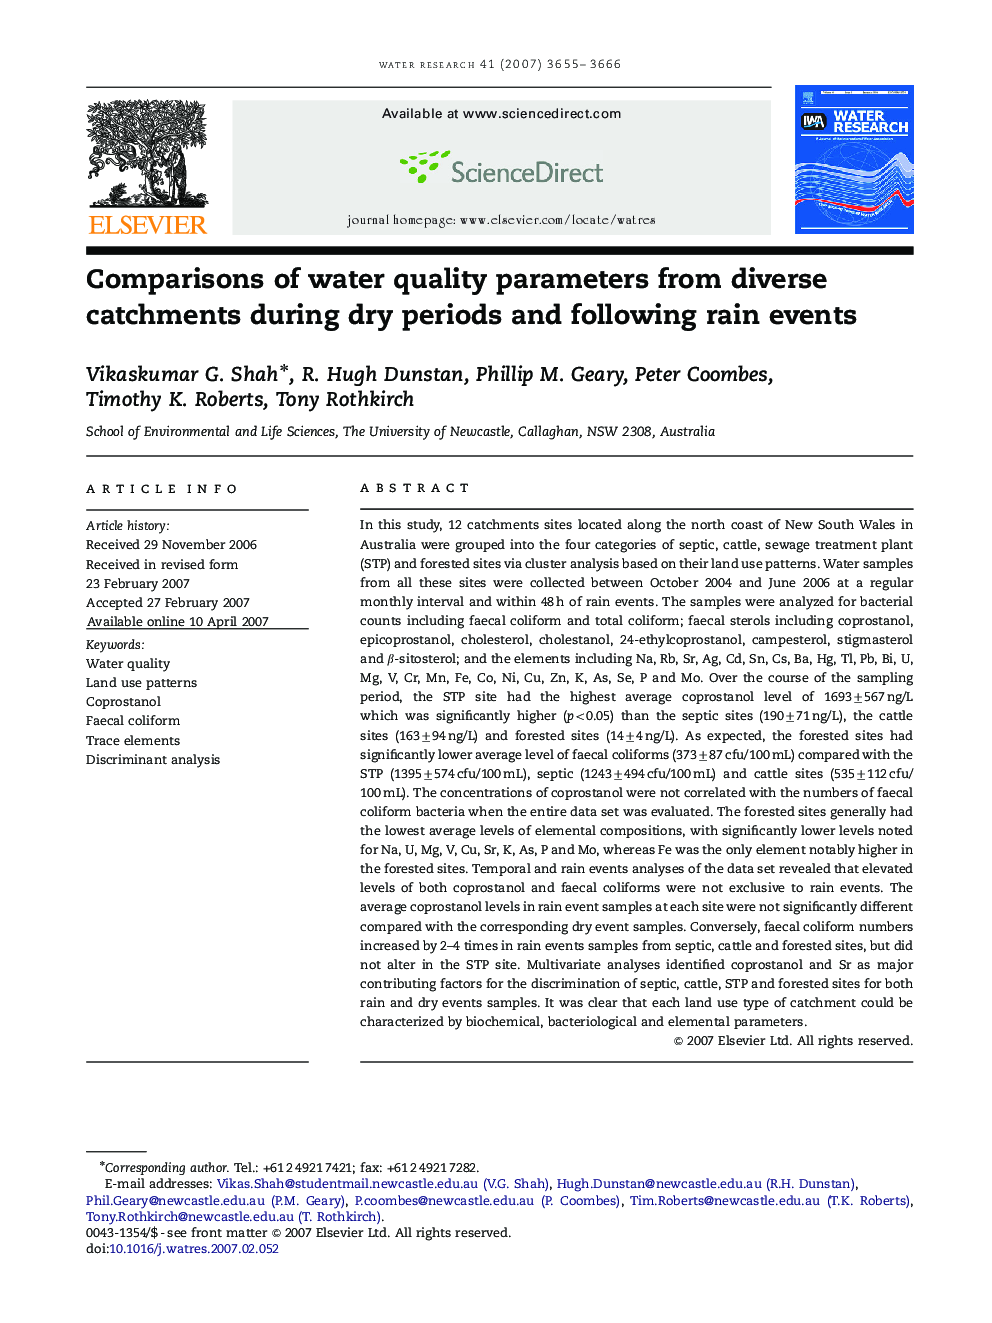 Comparisons of water quality parameters from diverse catchments during dry periods and following rain events